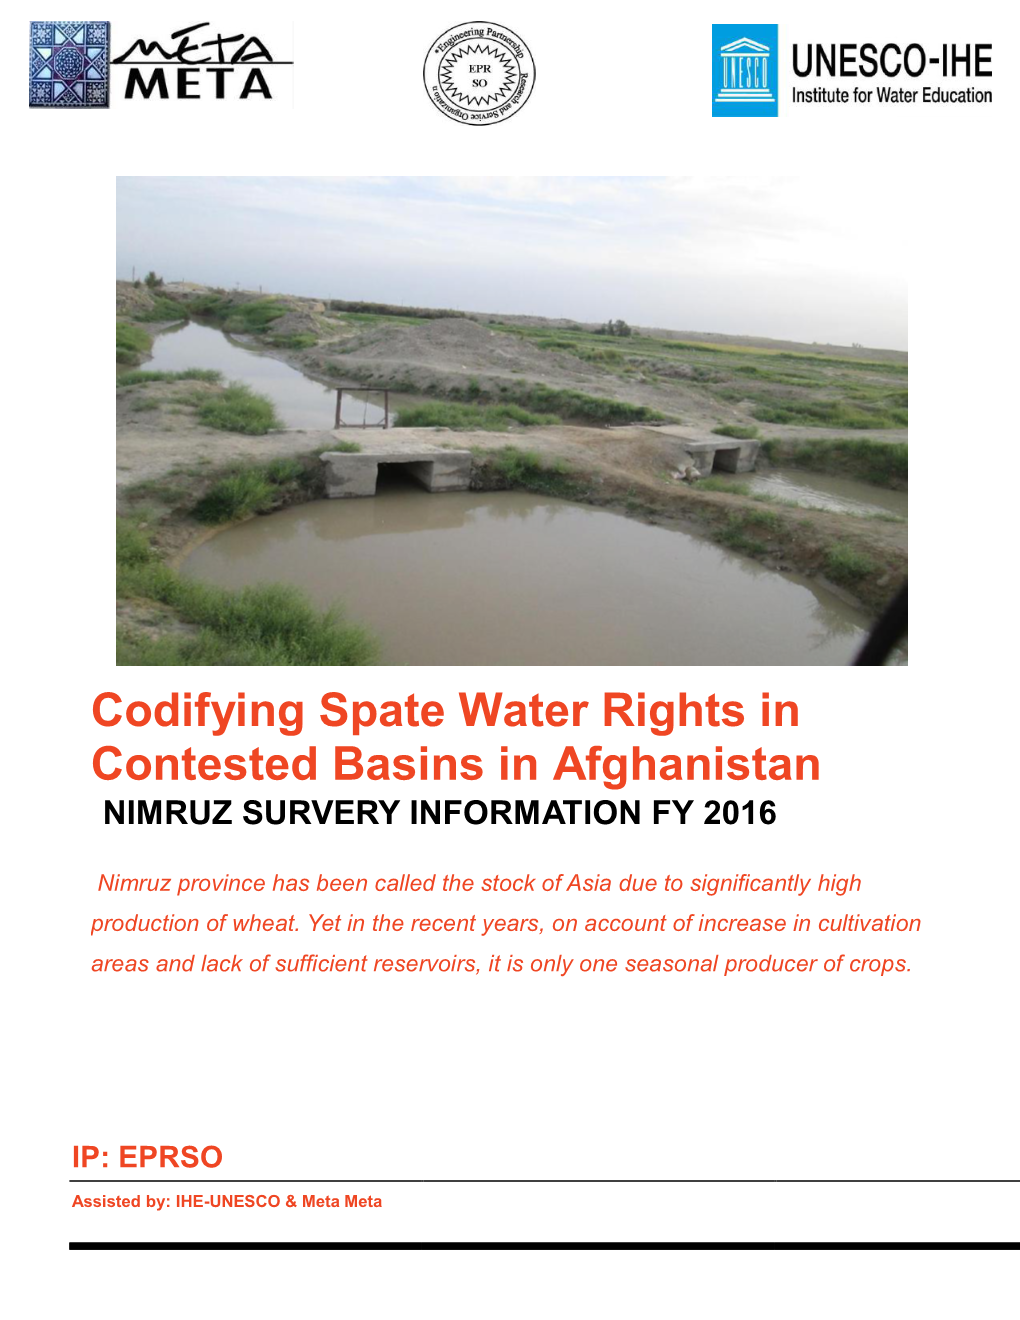 Codifying Spate Water Rights in Contested Basins in Afghanistan NIMRUZ SURVERY INFORMATION FY 2016